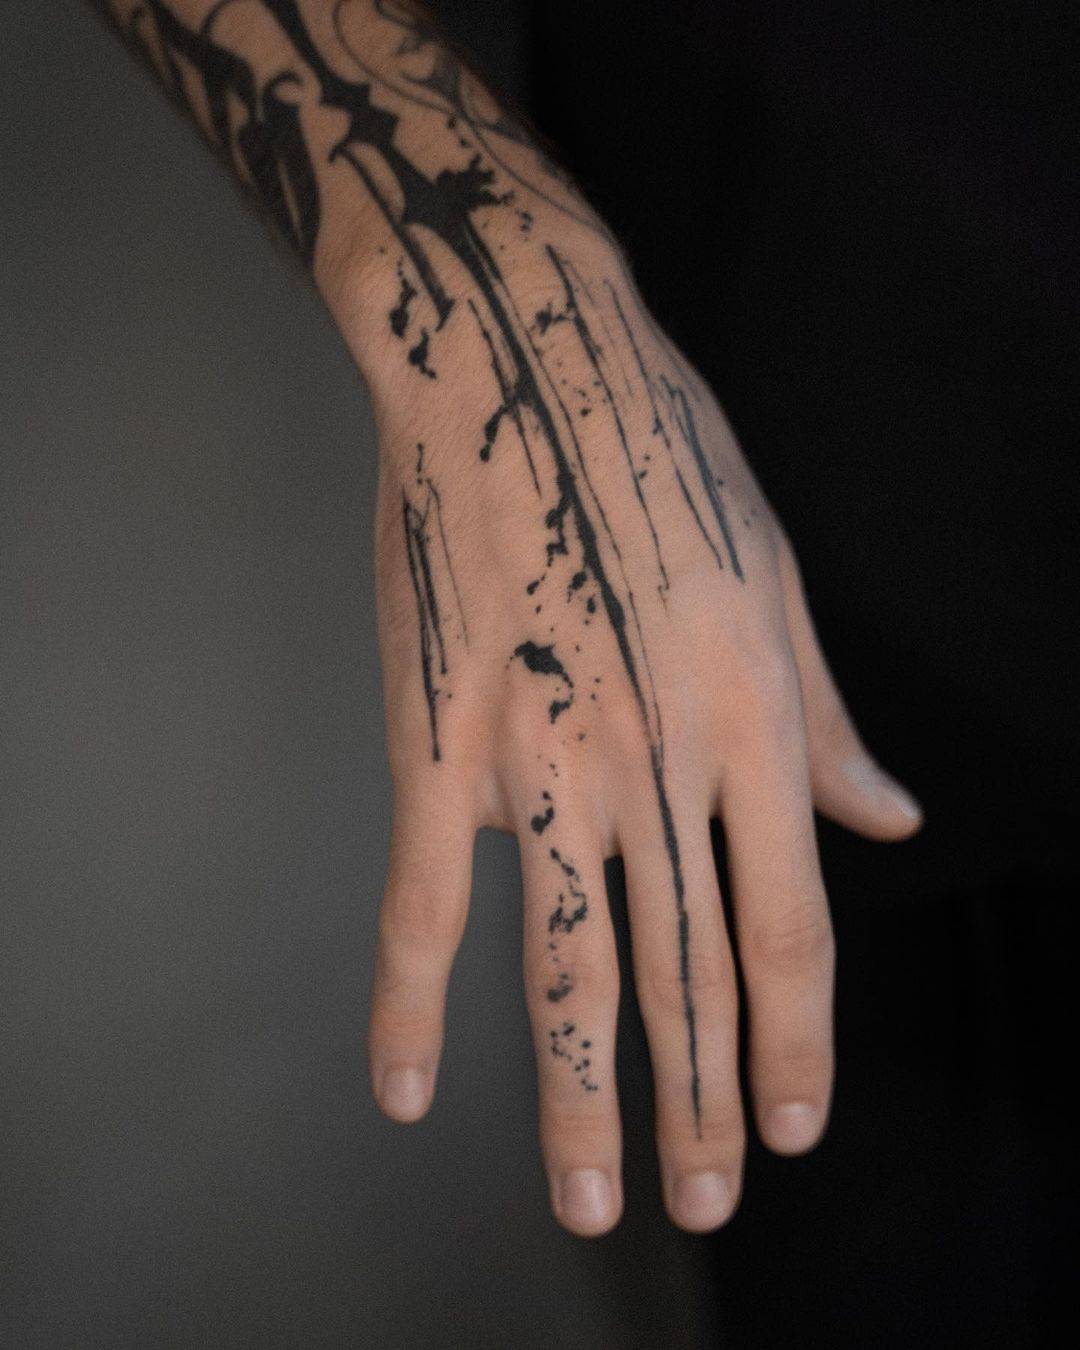 Amazing tattoo on hand by e.tedebring and contemporary tttism